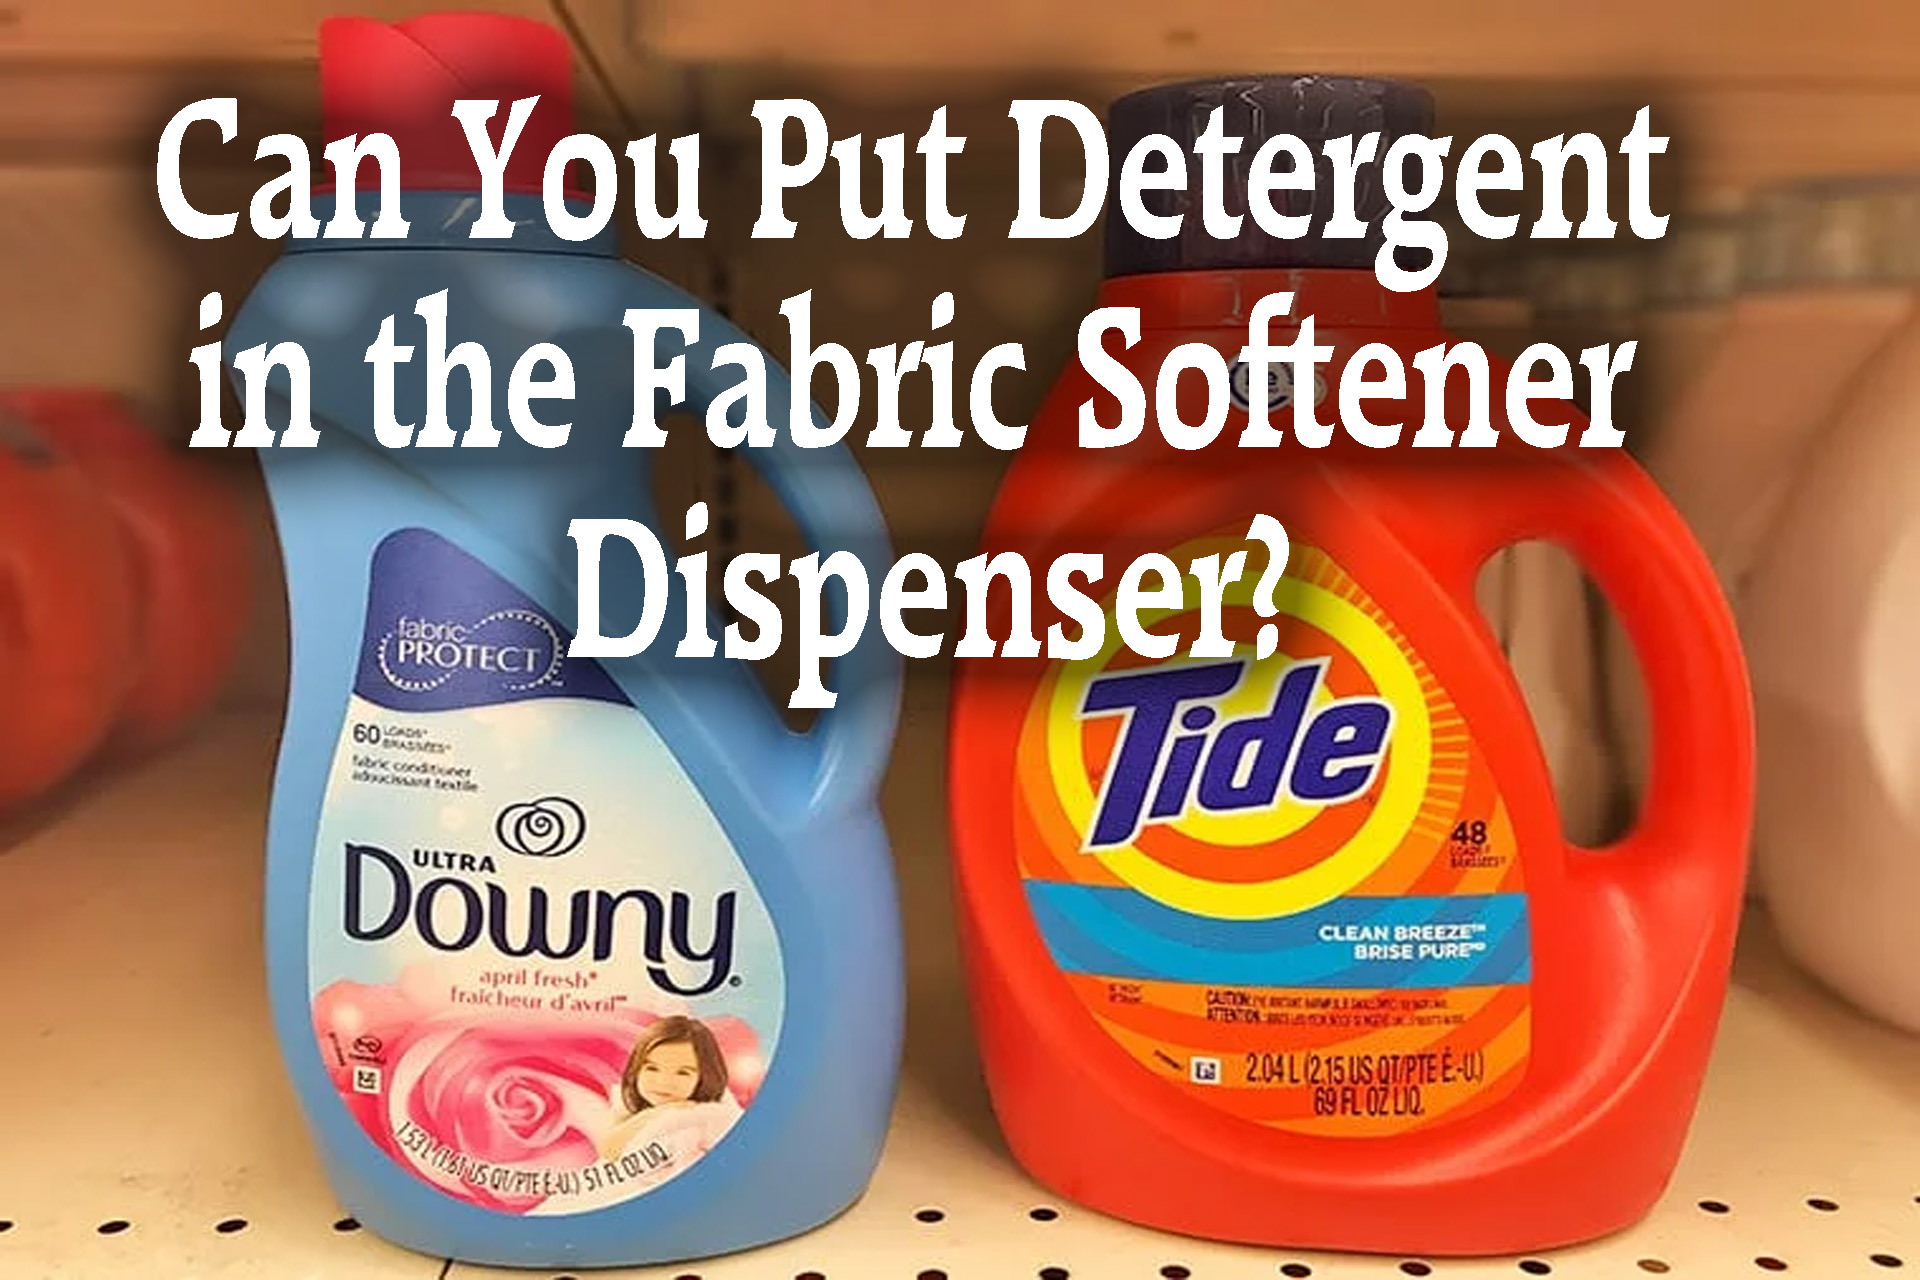 Can You Put Detergent in the Fabric Softener Dispenser?